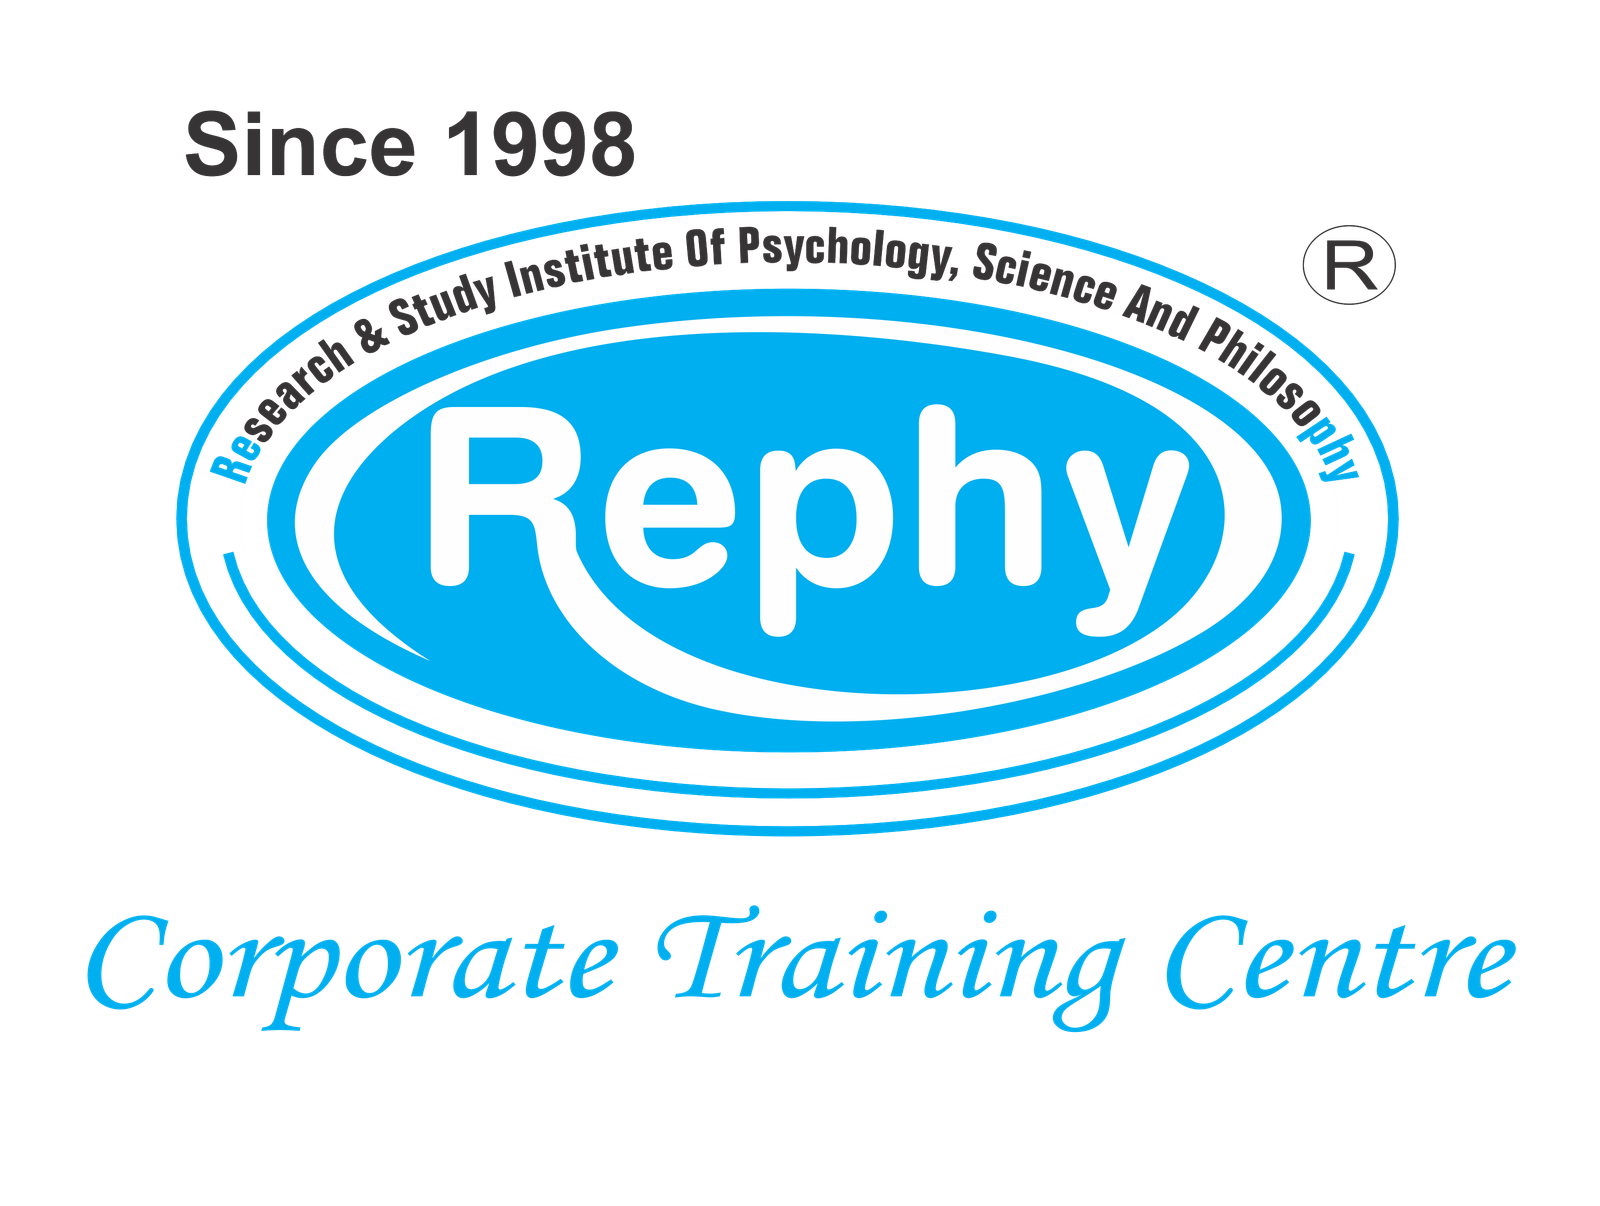 Rephy Corporate Training Center 